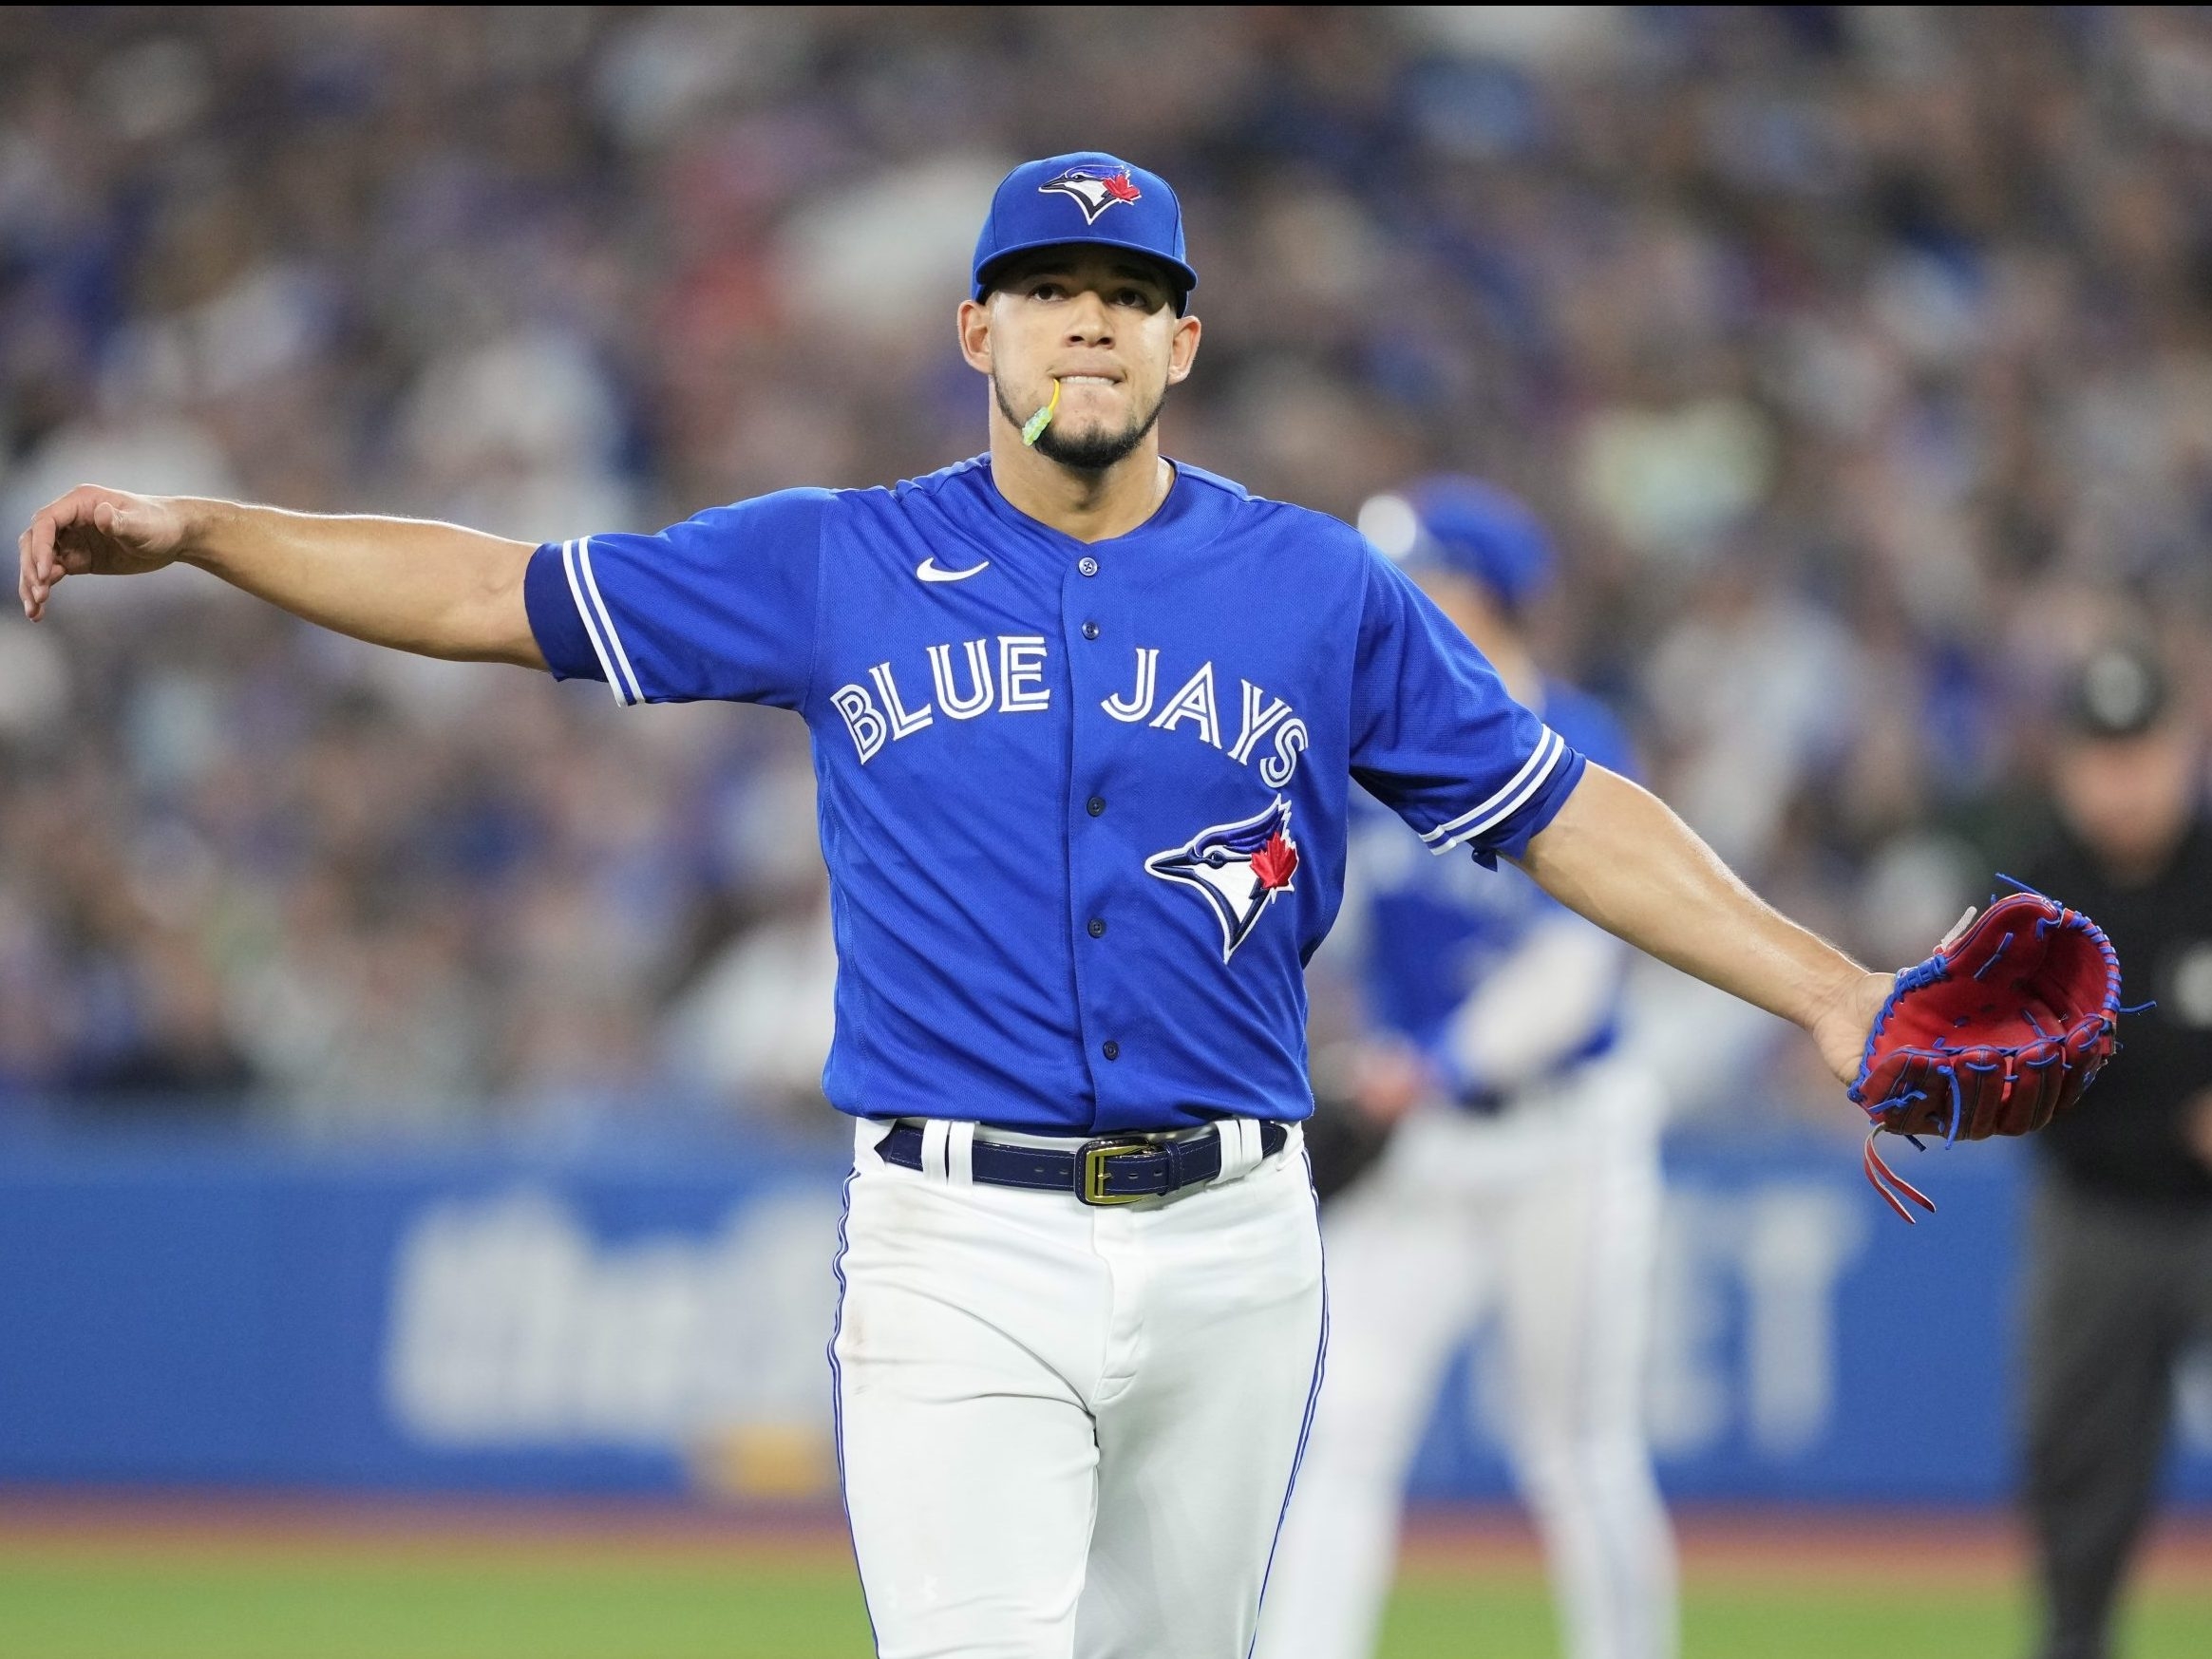 Blue Jays rotation on a roll as renewed pitching momentum fuels winning